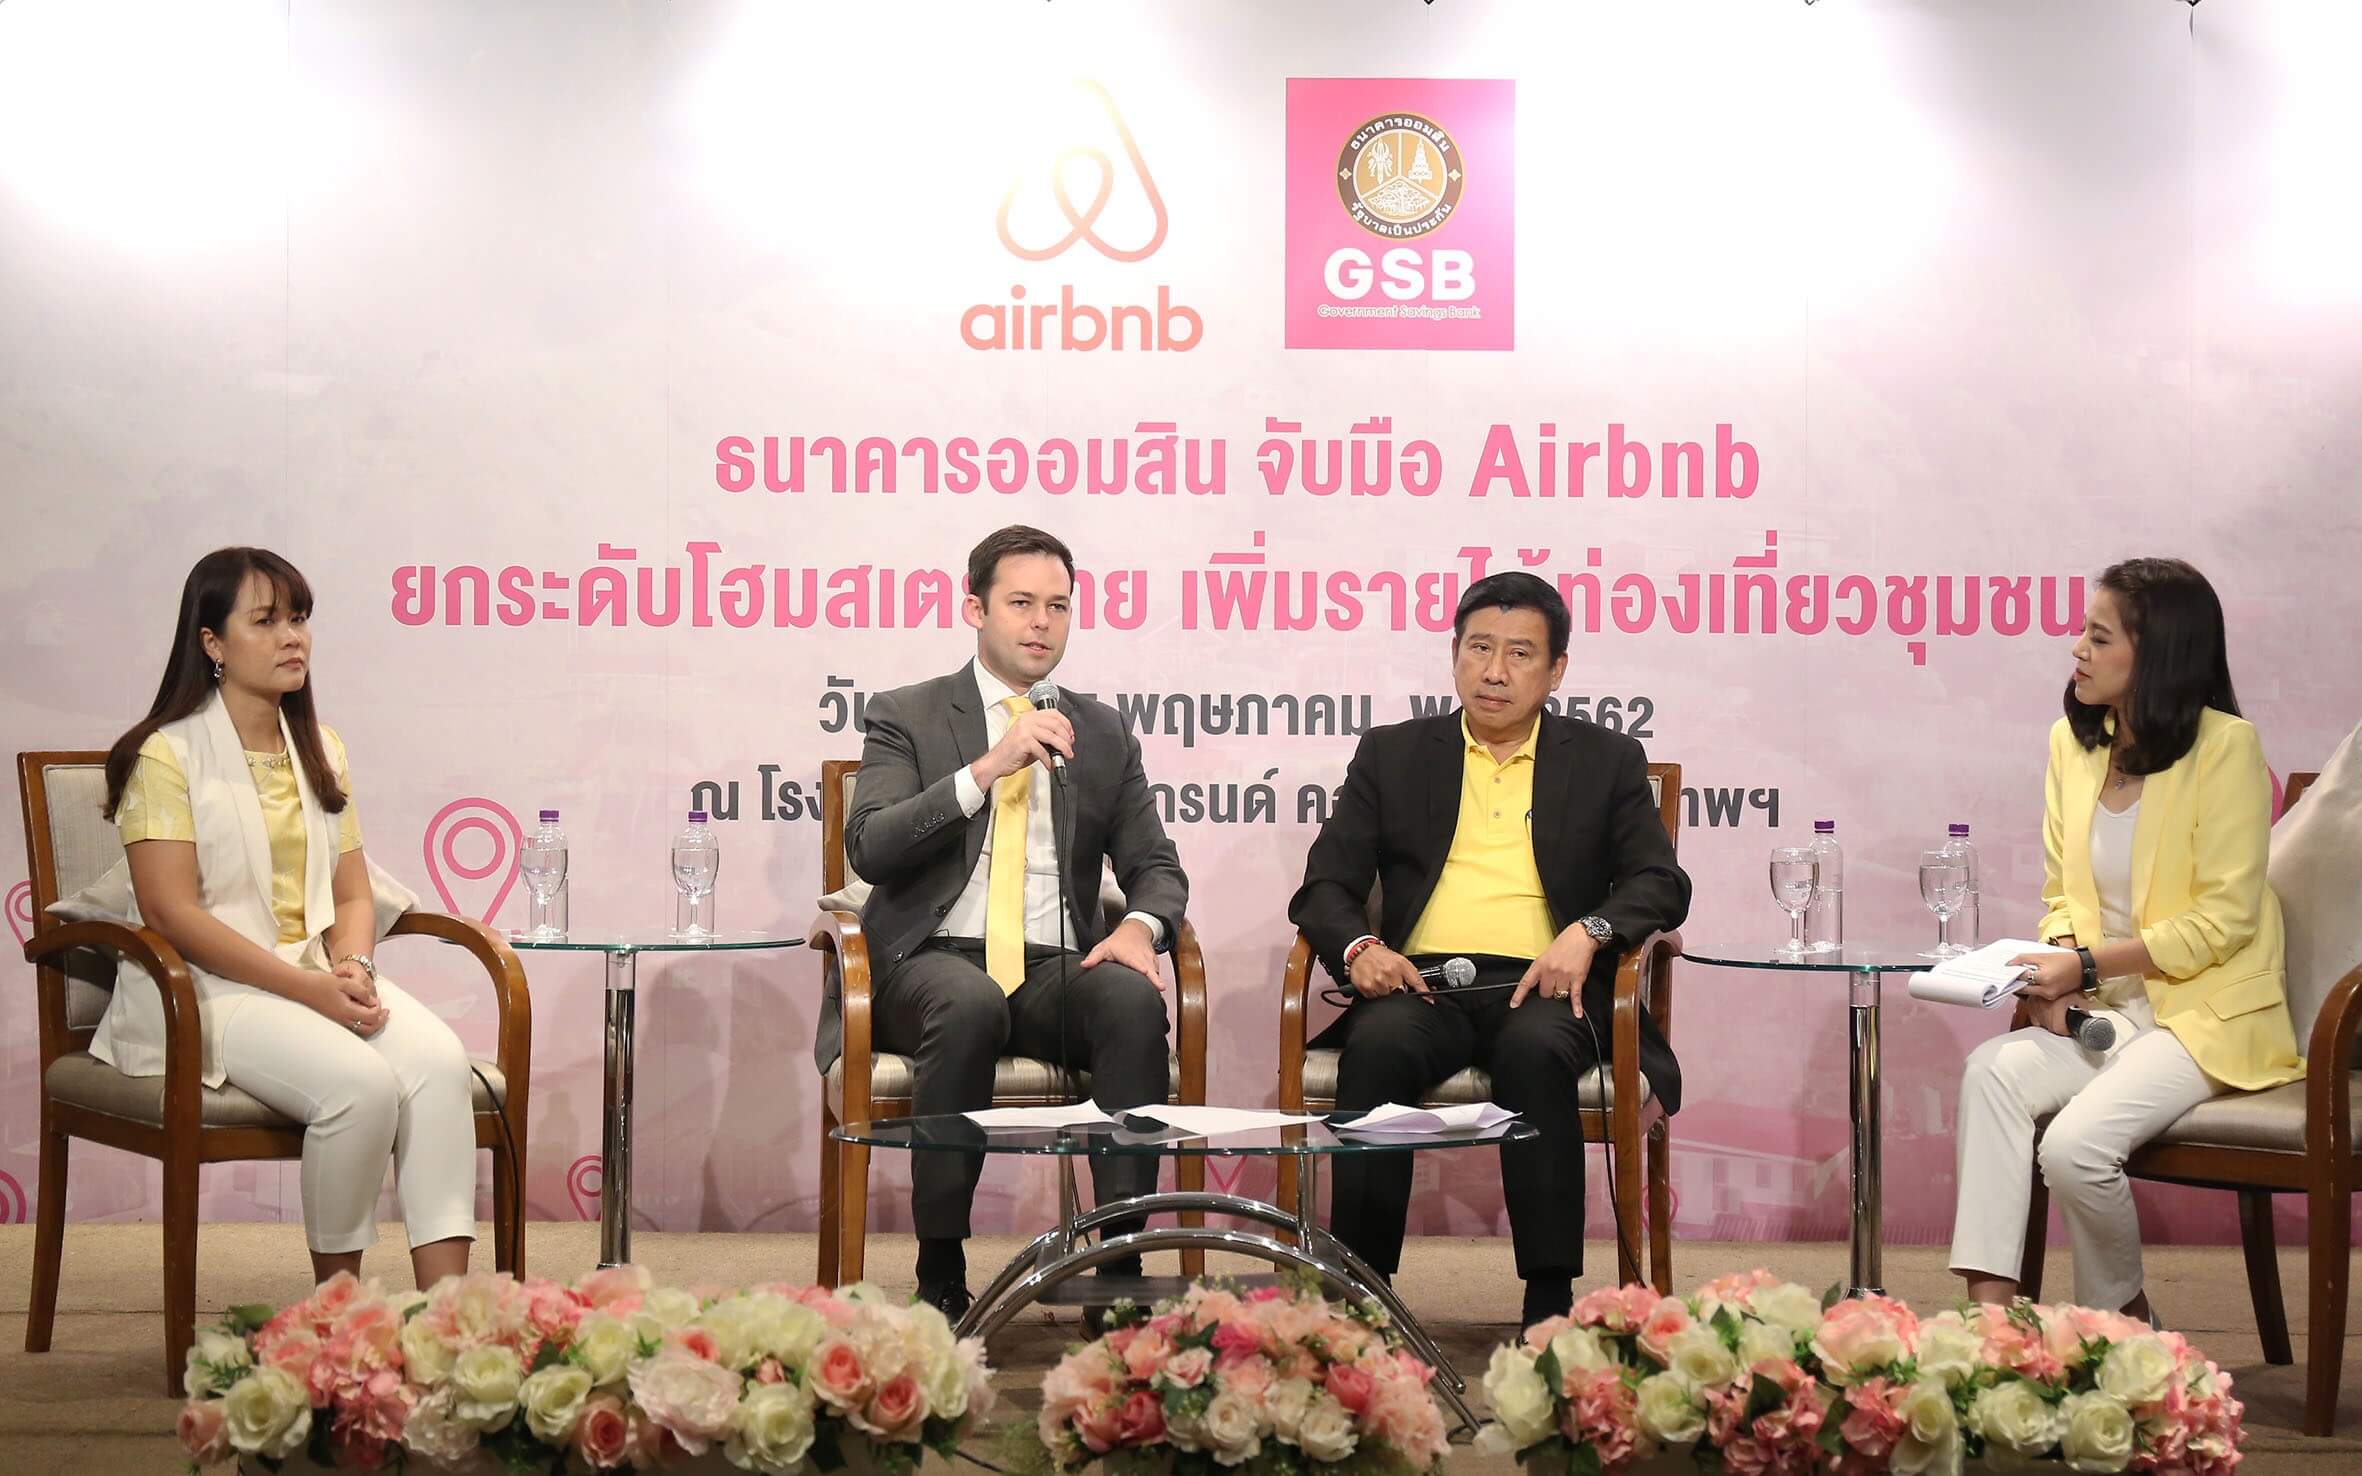 Dr.-Chatchai-Payuhanaveechai-GSB-President-and-CEO-and-Mike-Orgill-Airbnb-General-Manager-for-Southeast-Asia-Hong-Kong-and-Taiwan-joint-set-the-partnership